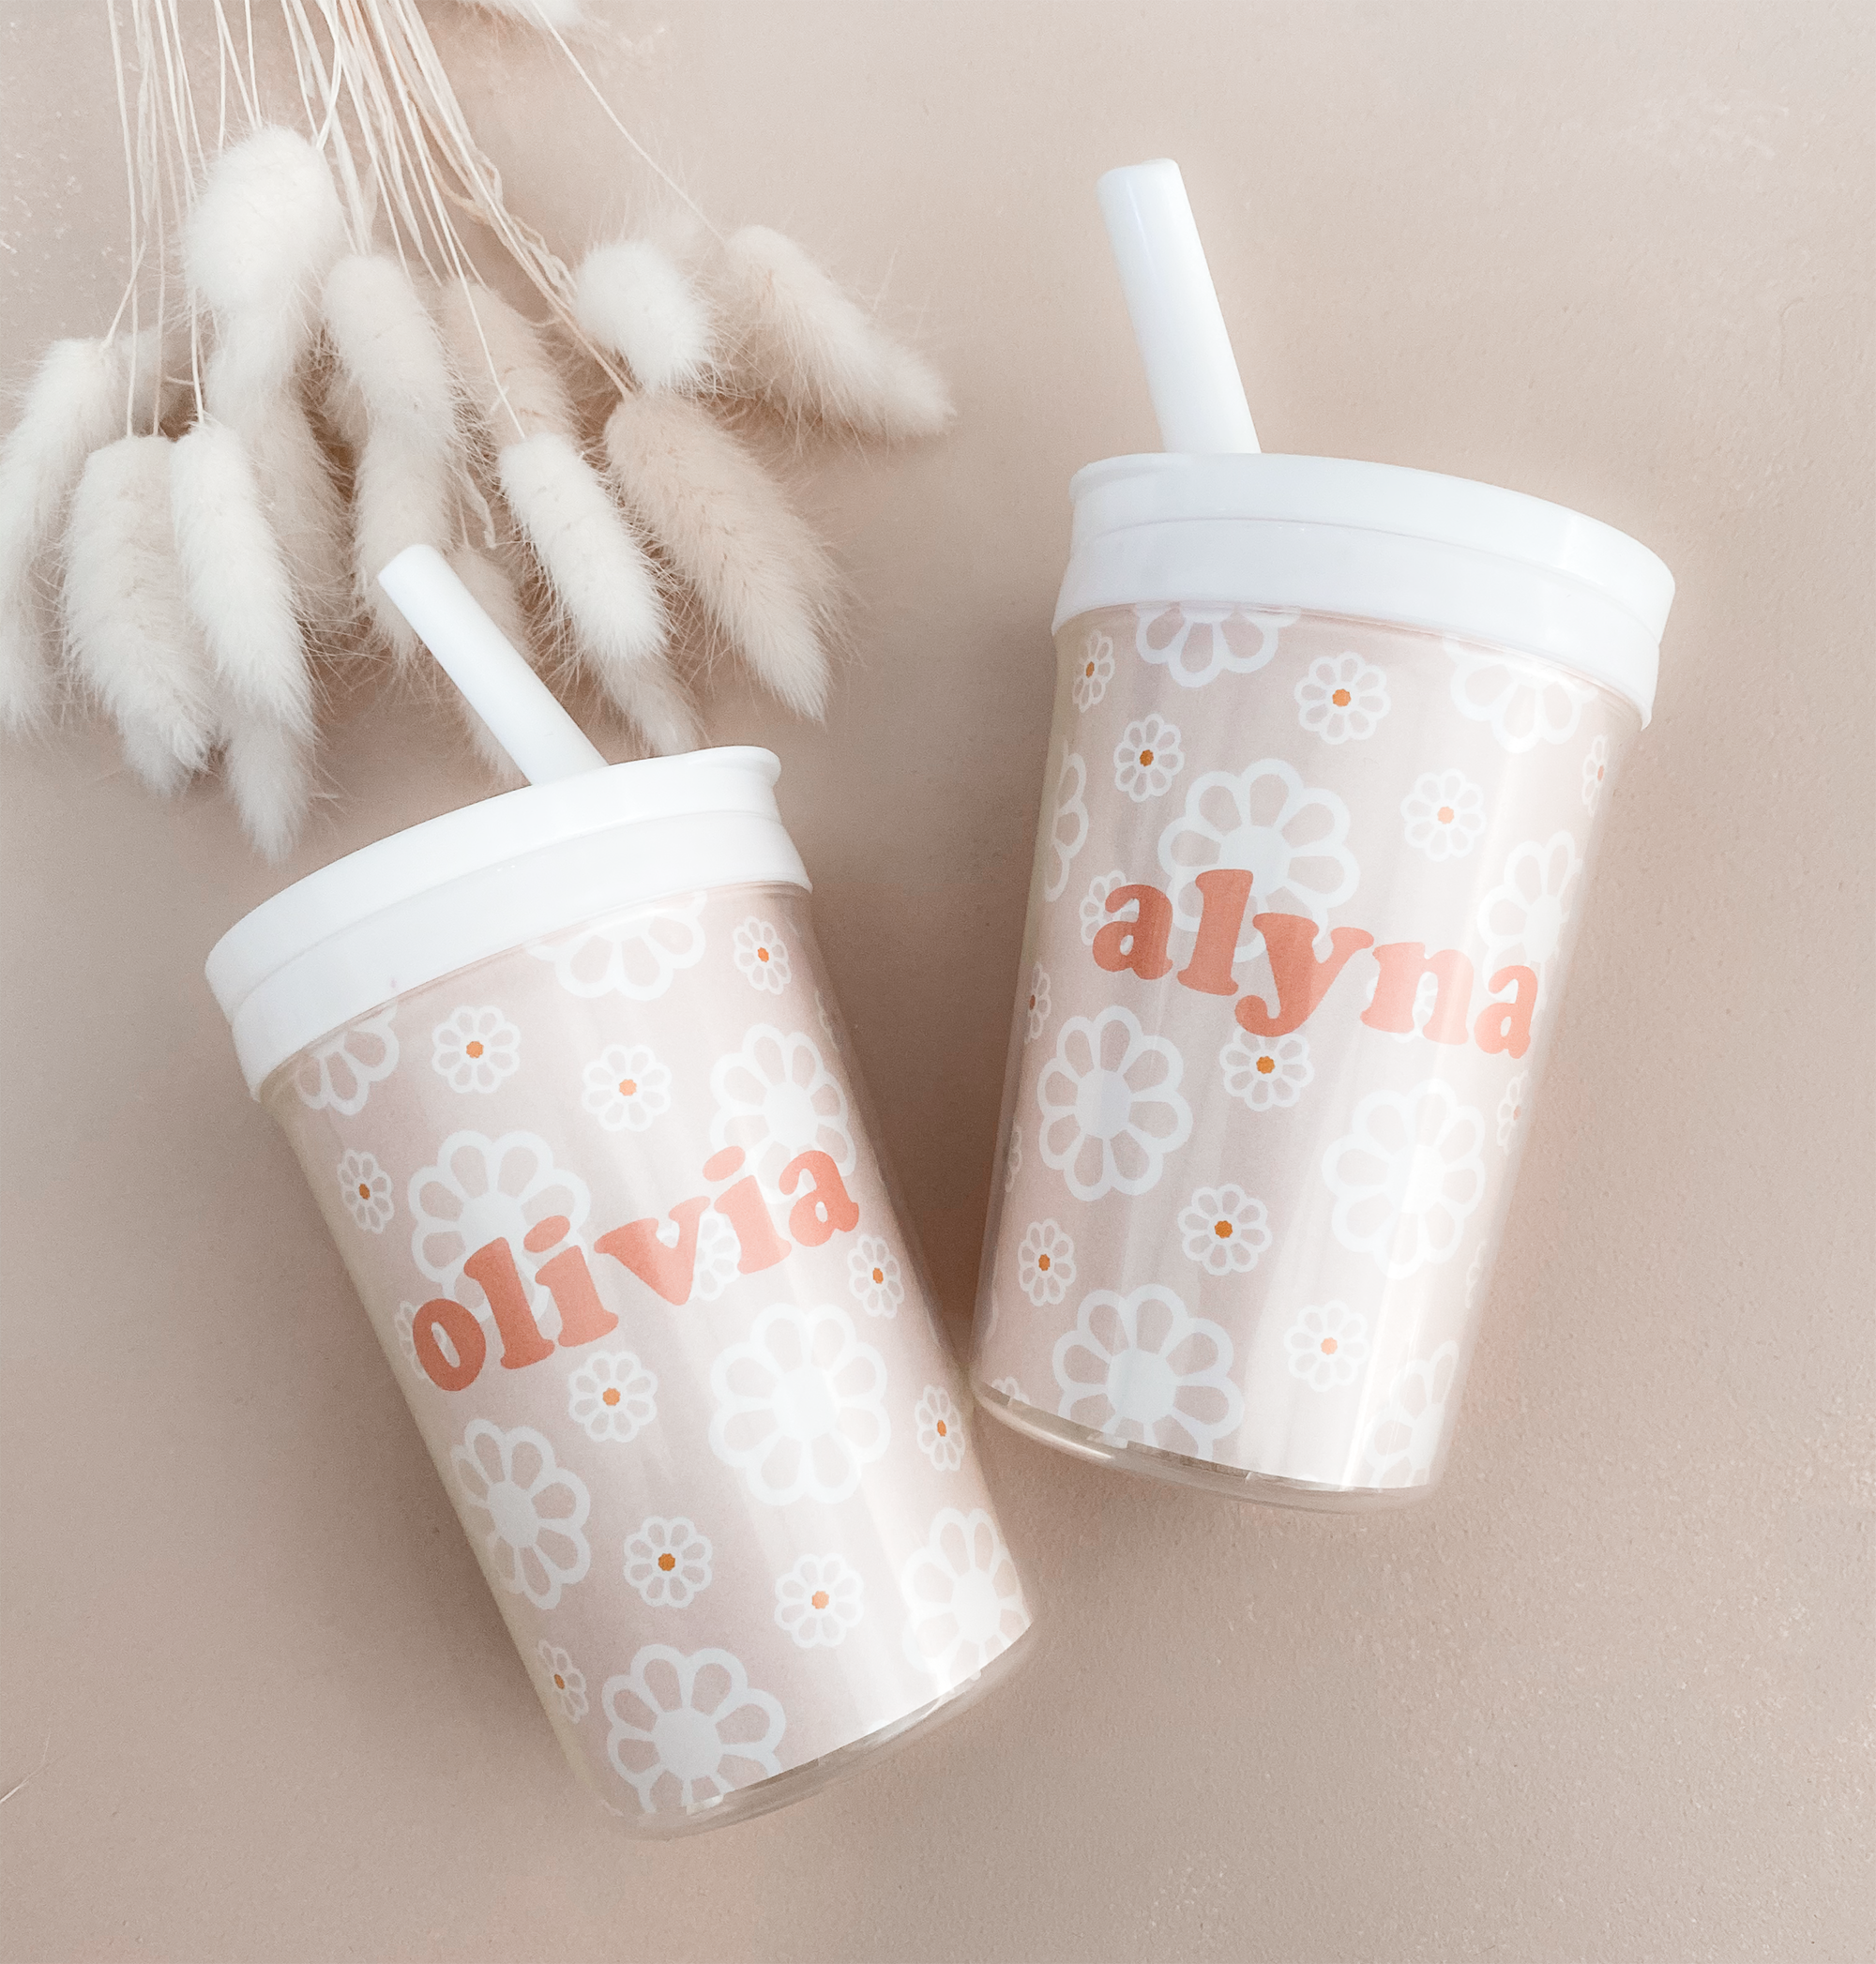 Kids Sippy Cup Design, Kids Theme Tumbler, Kids Travel Cup With Straw &  Lid, Custom Sippy Cup Tumbler, Personalized Character Cup 